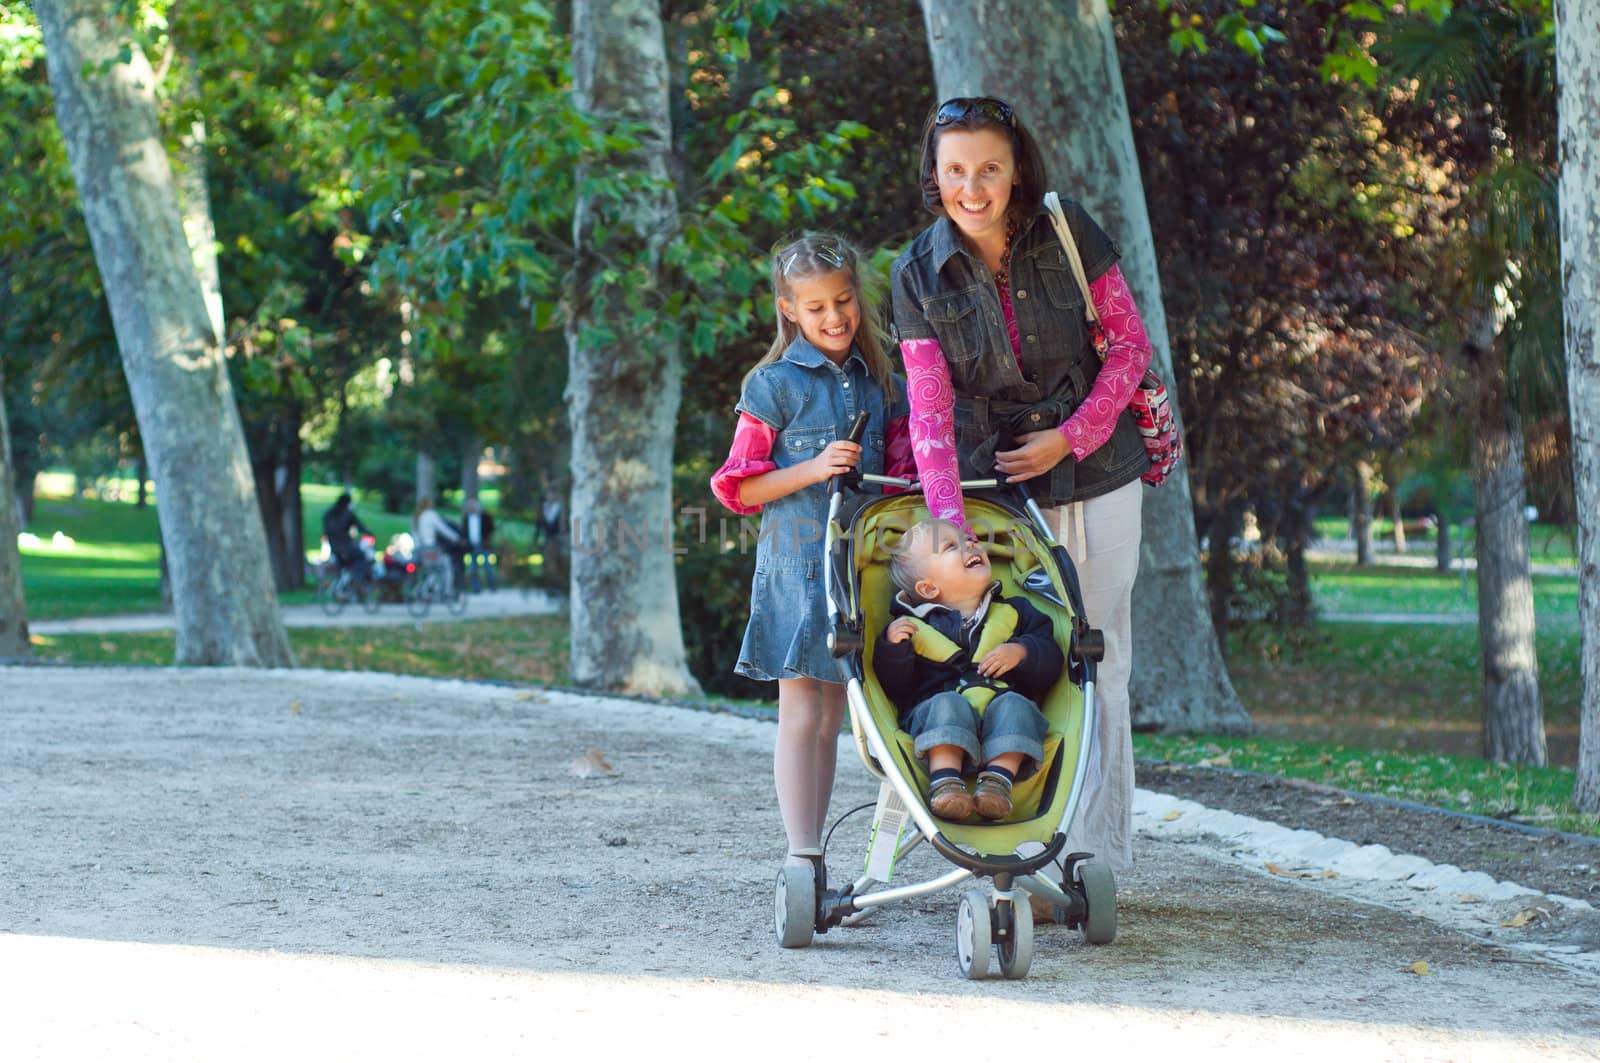 A family walking in the park in the sunny day